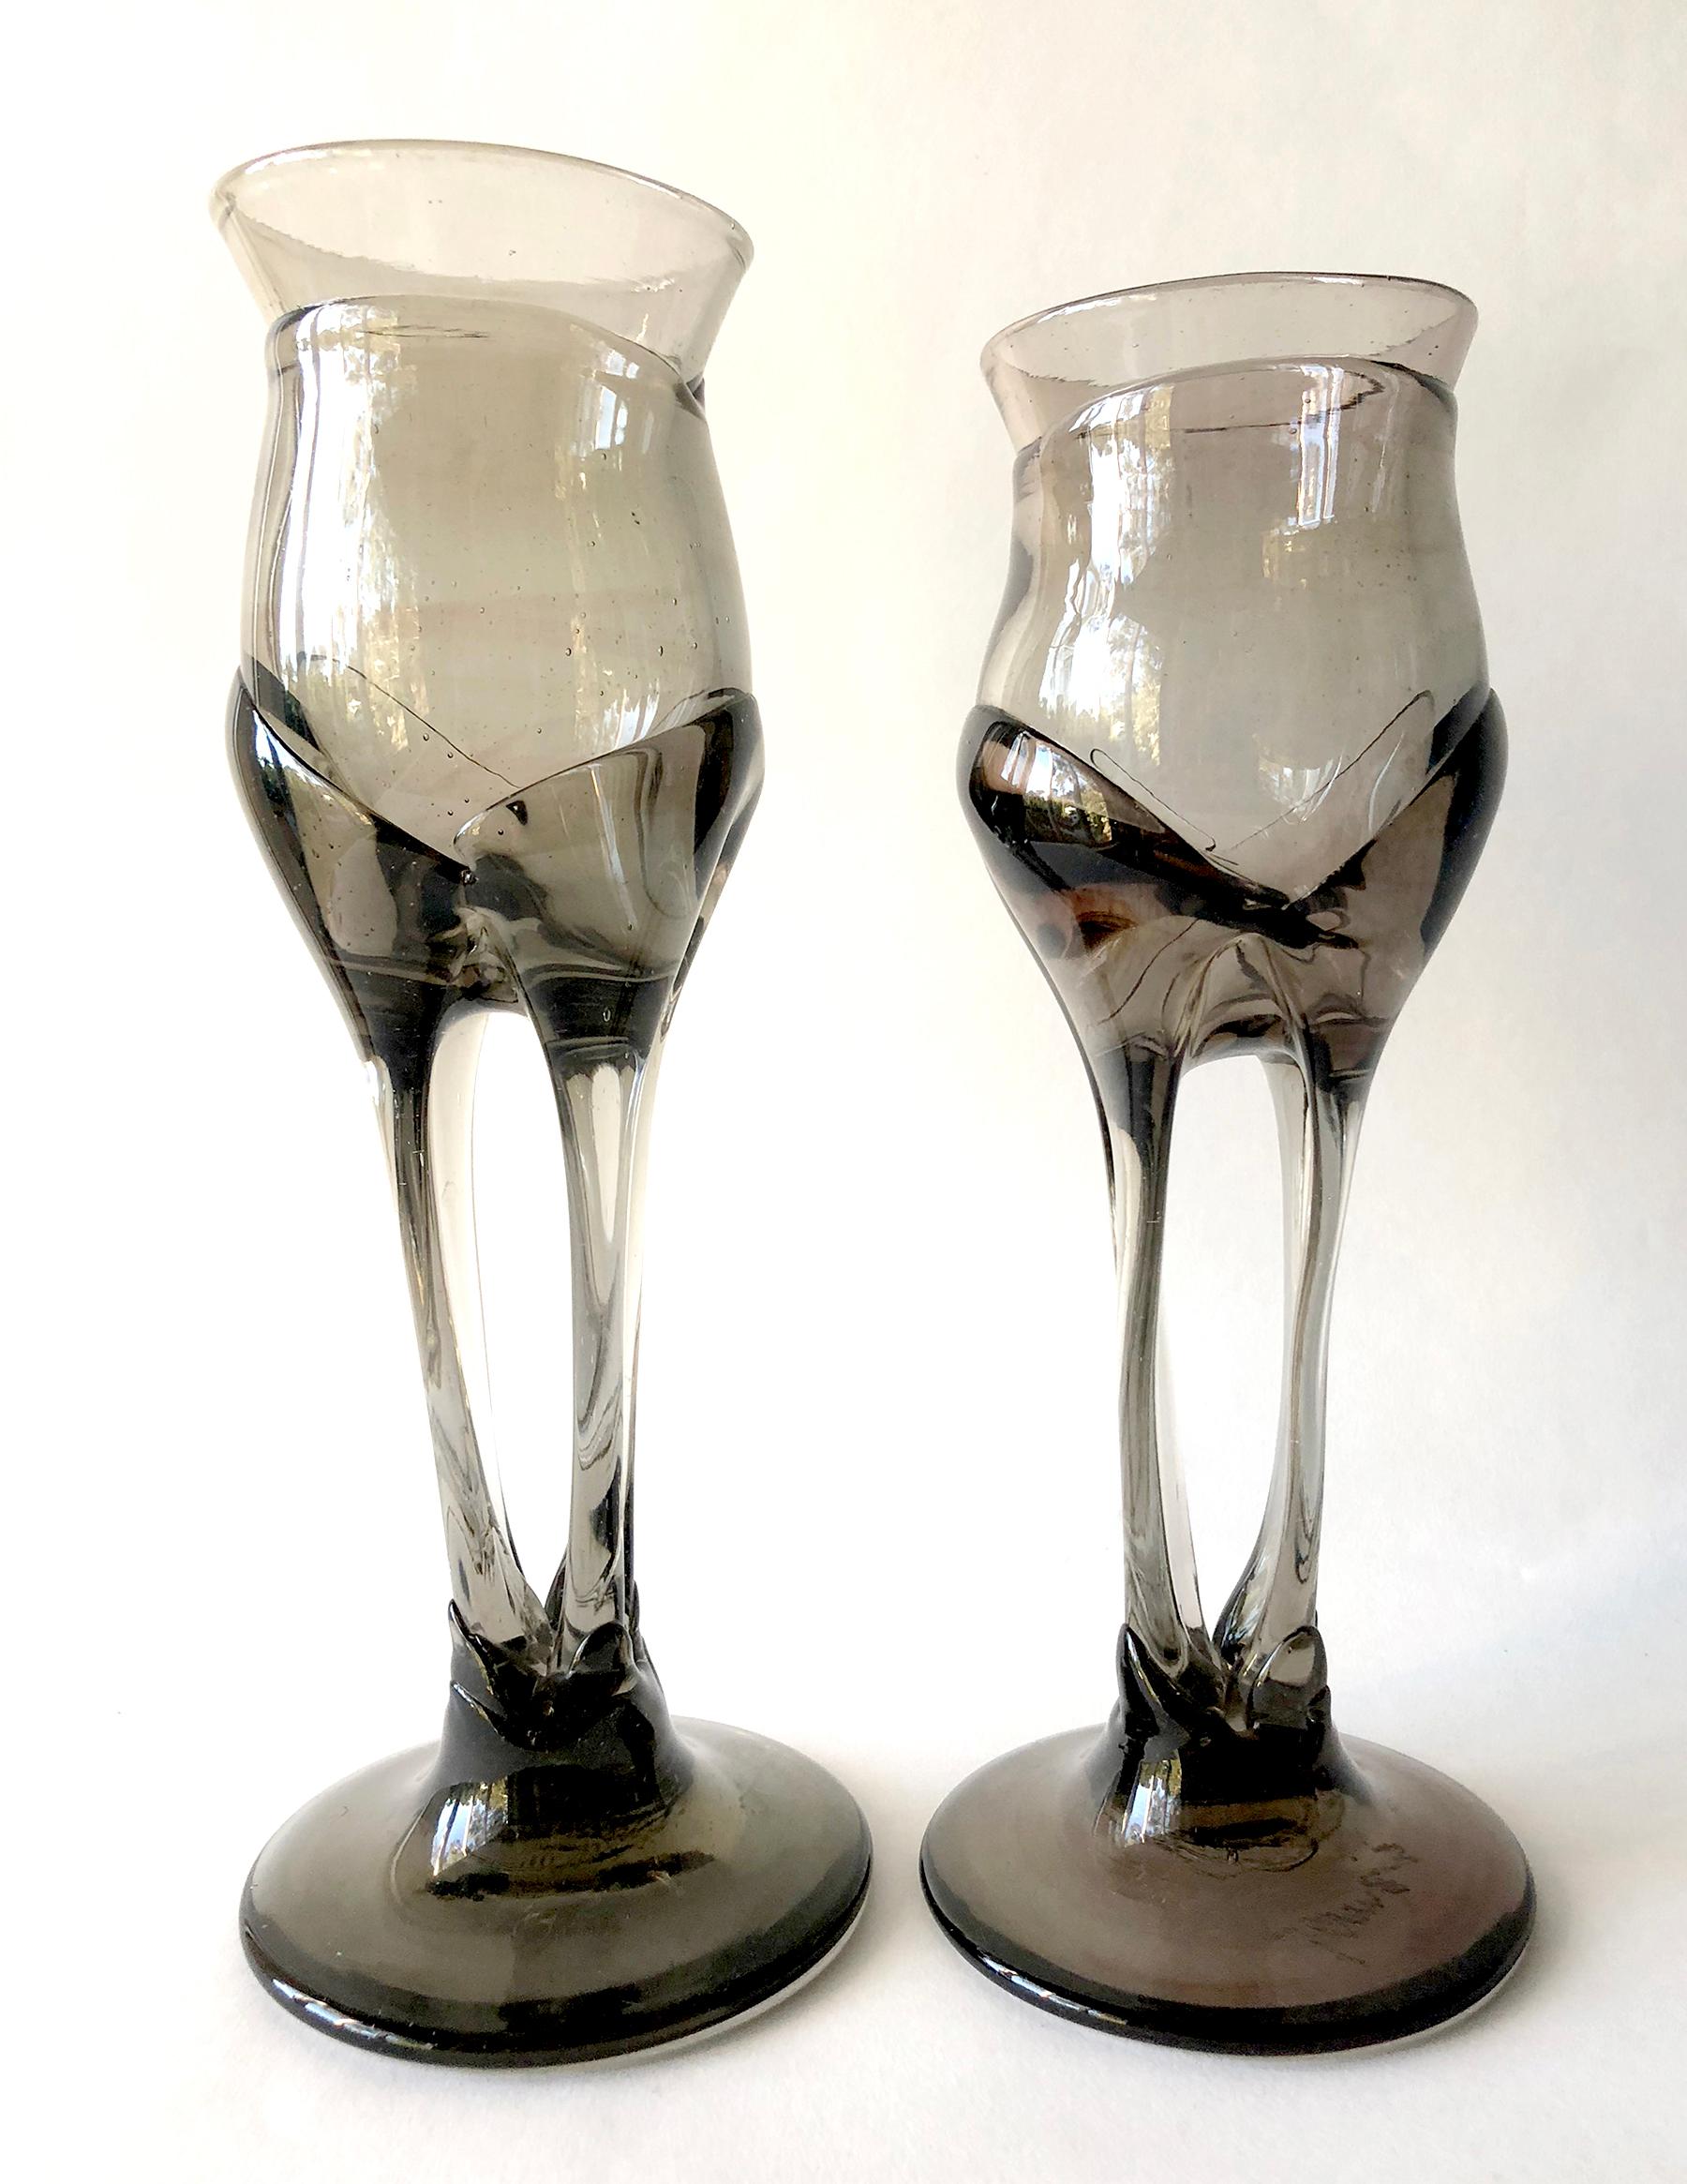 1970s smoked glass organic goblets made by California glass blower, James Wayne. Wayne taught at U.S.C. and San Jose City College and exhibited at the California Design shows in the 1960s and 1970s. Goblets Stand tall 10